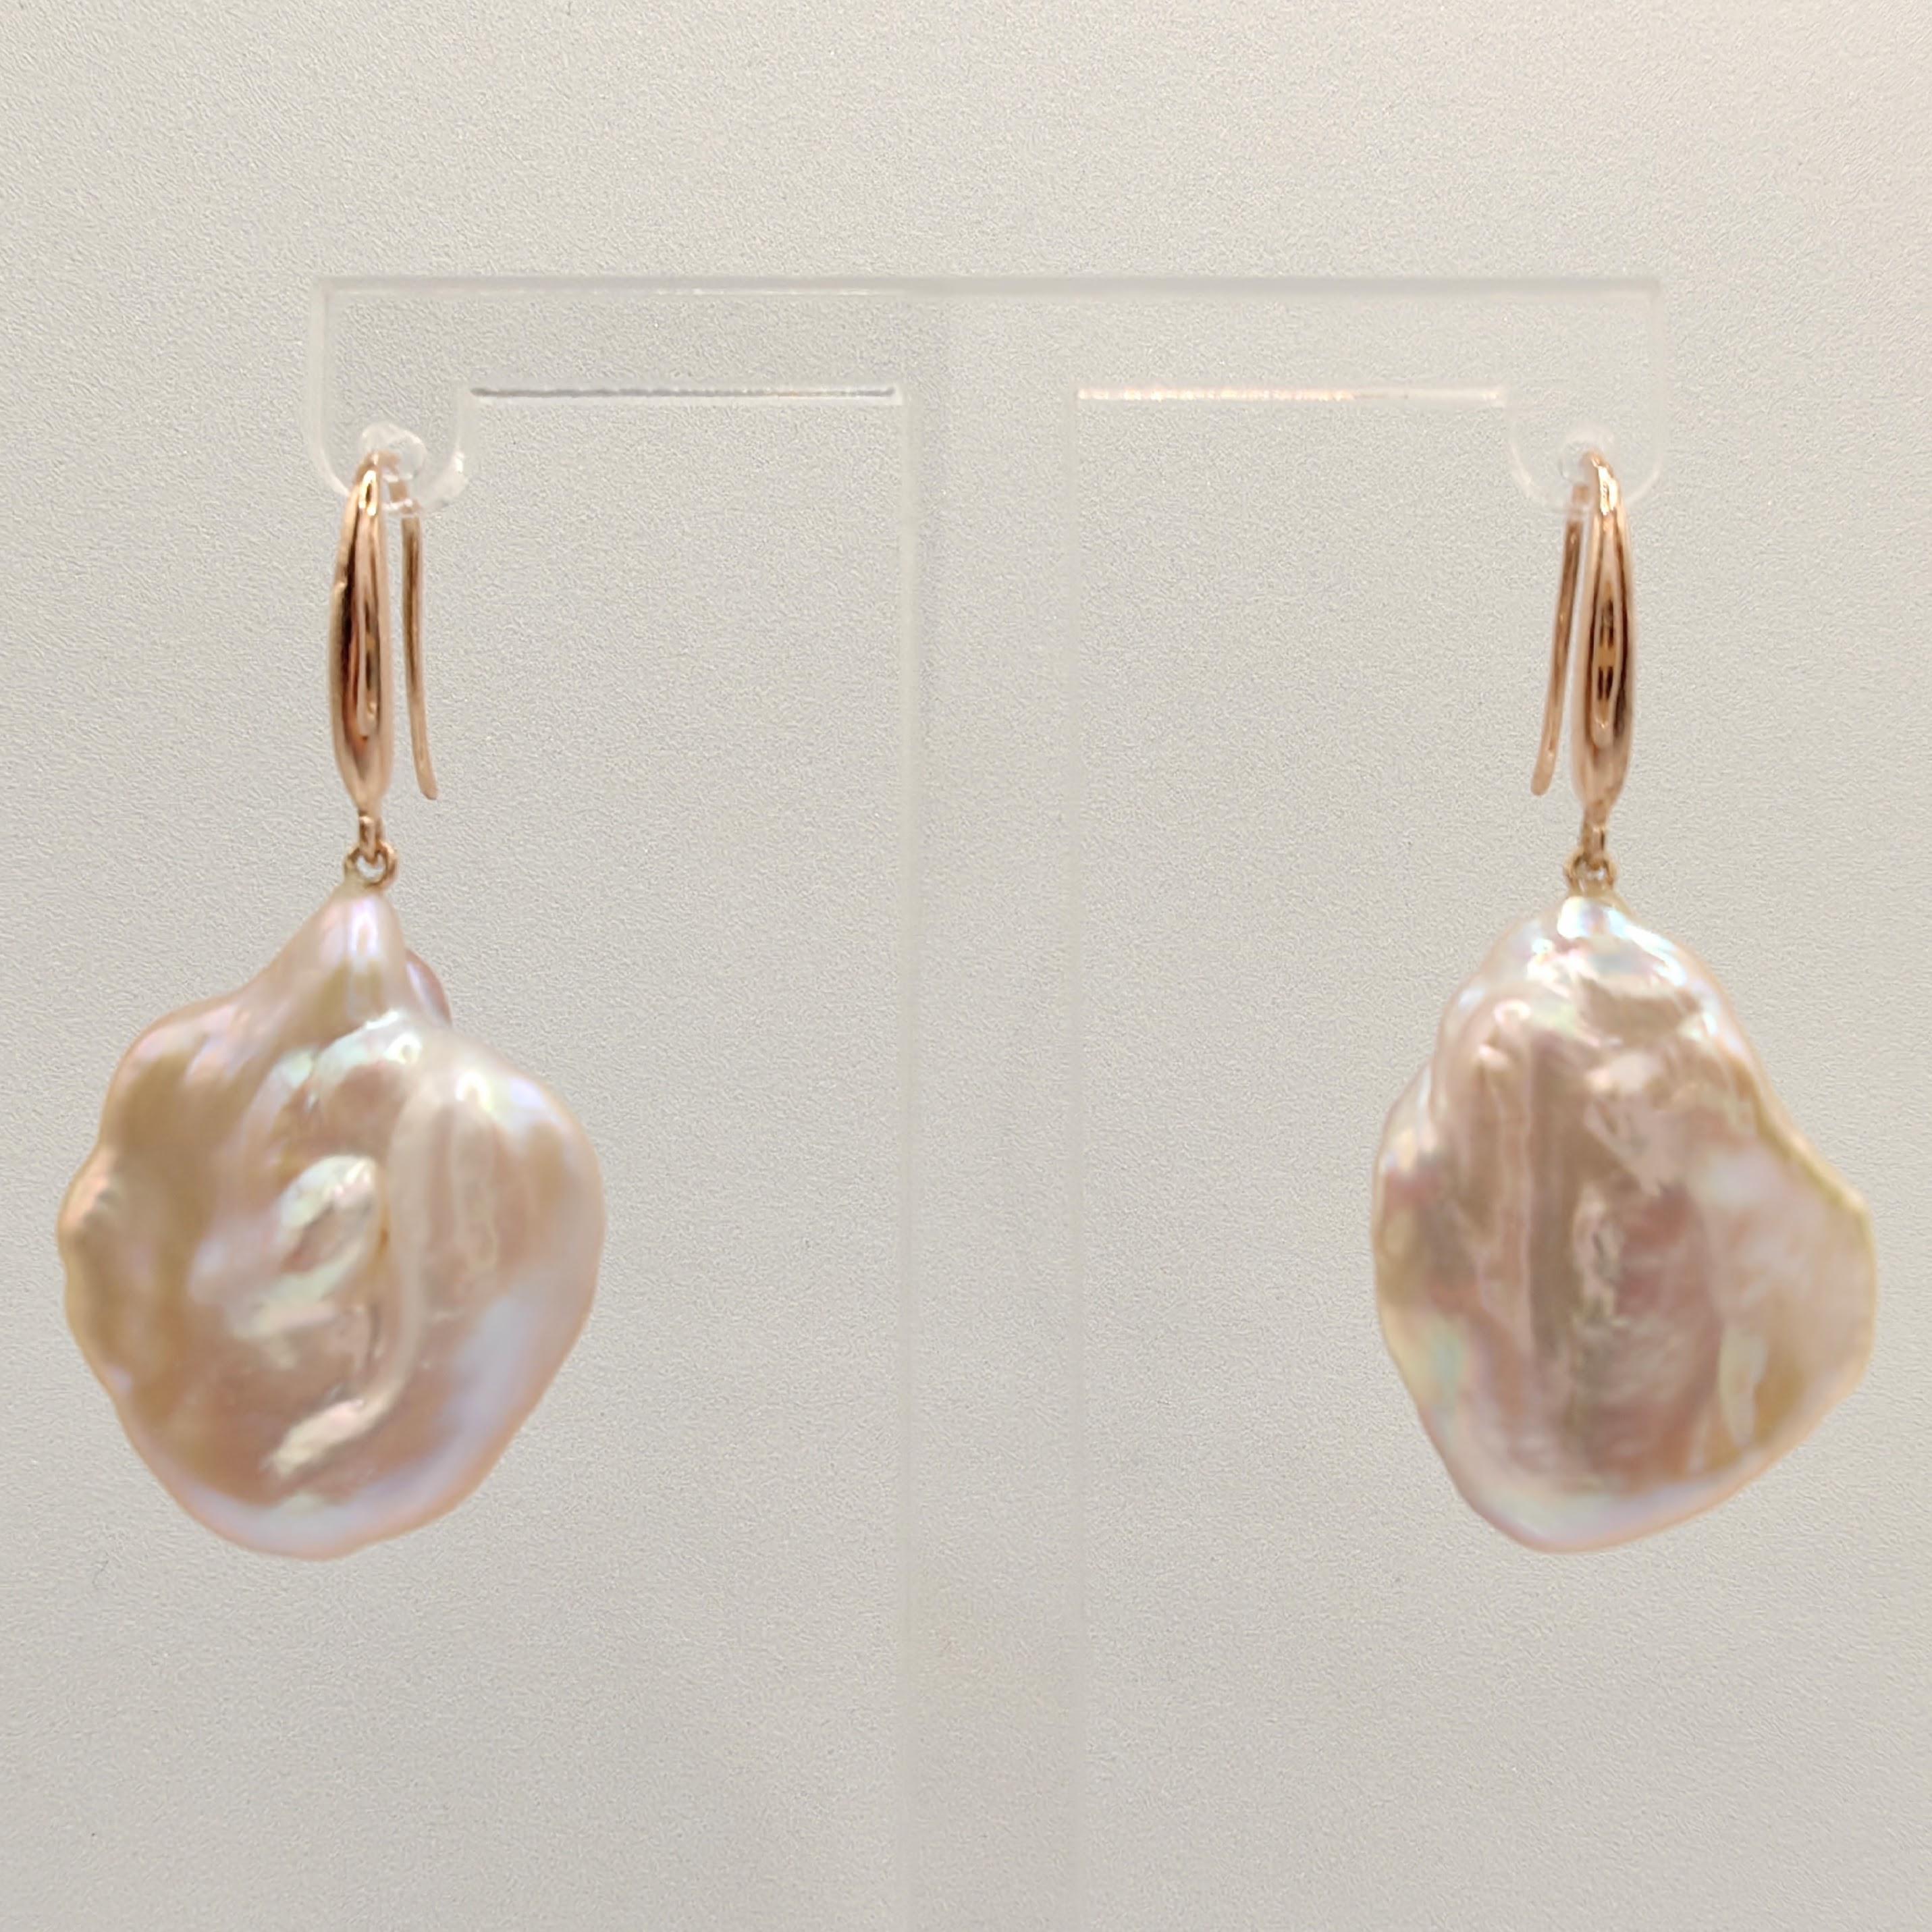 Elevate your look with the ethereal charm of our Pink-Peach Keshi Pearl Dangling Drop Earrings, a celebration of delicate elegance and natural beauty. These exquisite earrings feature lustrous Freshwater Cultured Keshi Pearls, which are formed